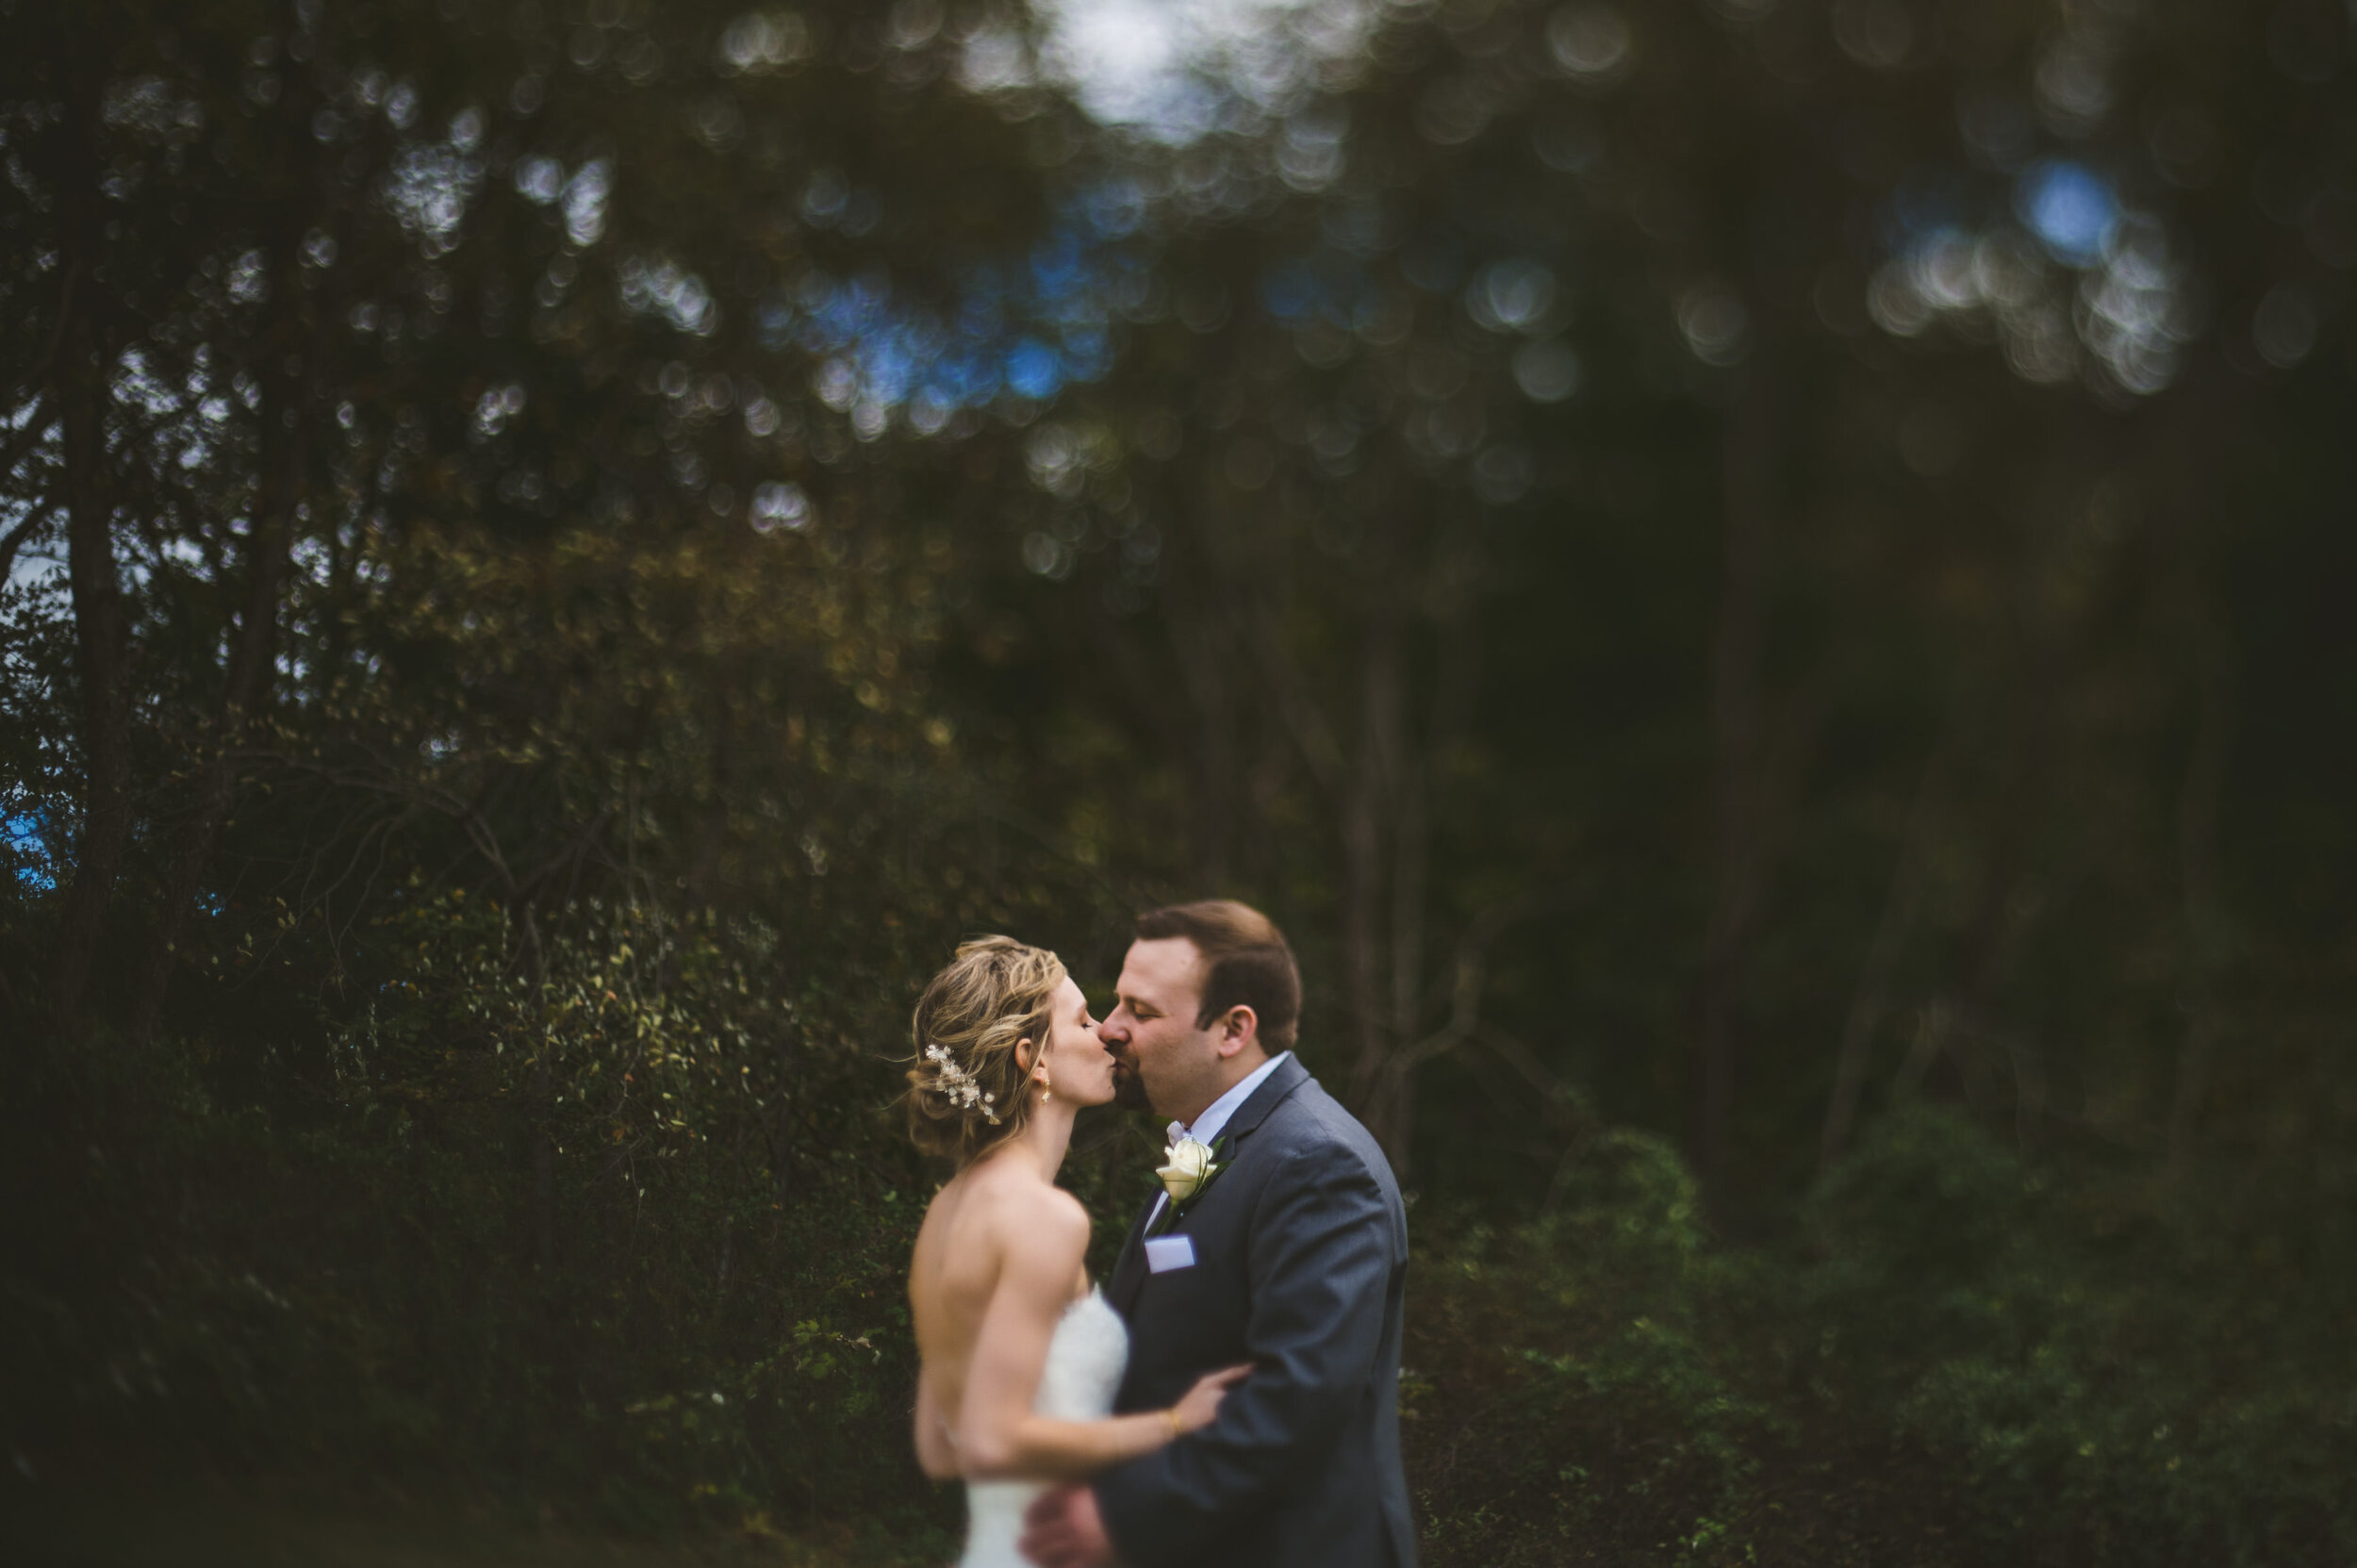 dynamic and modern wedding photography in new jersey and new york